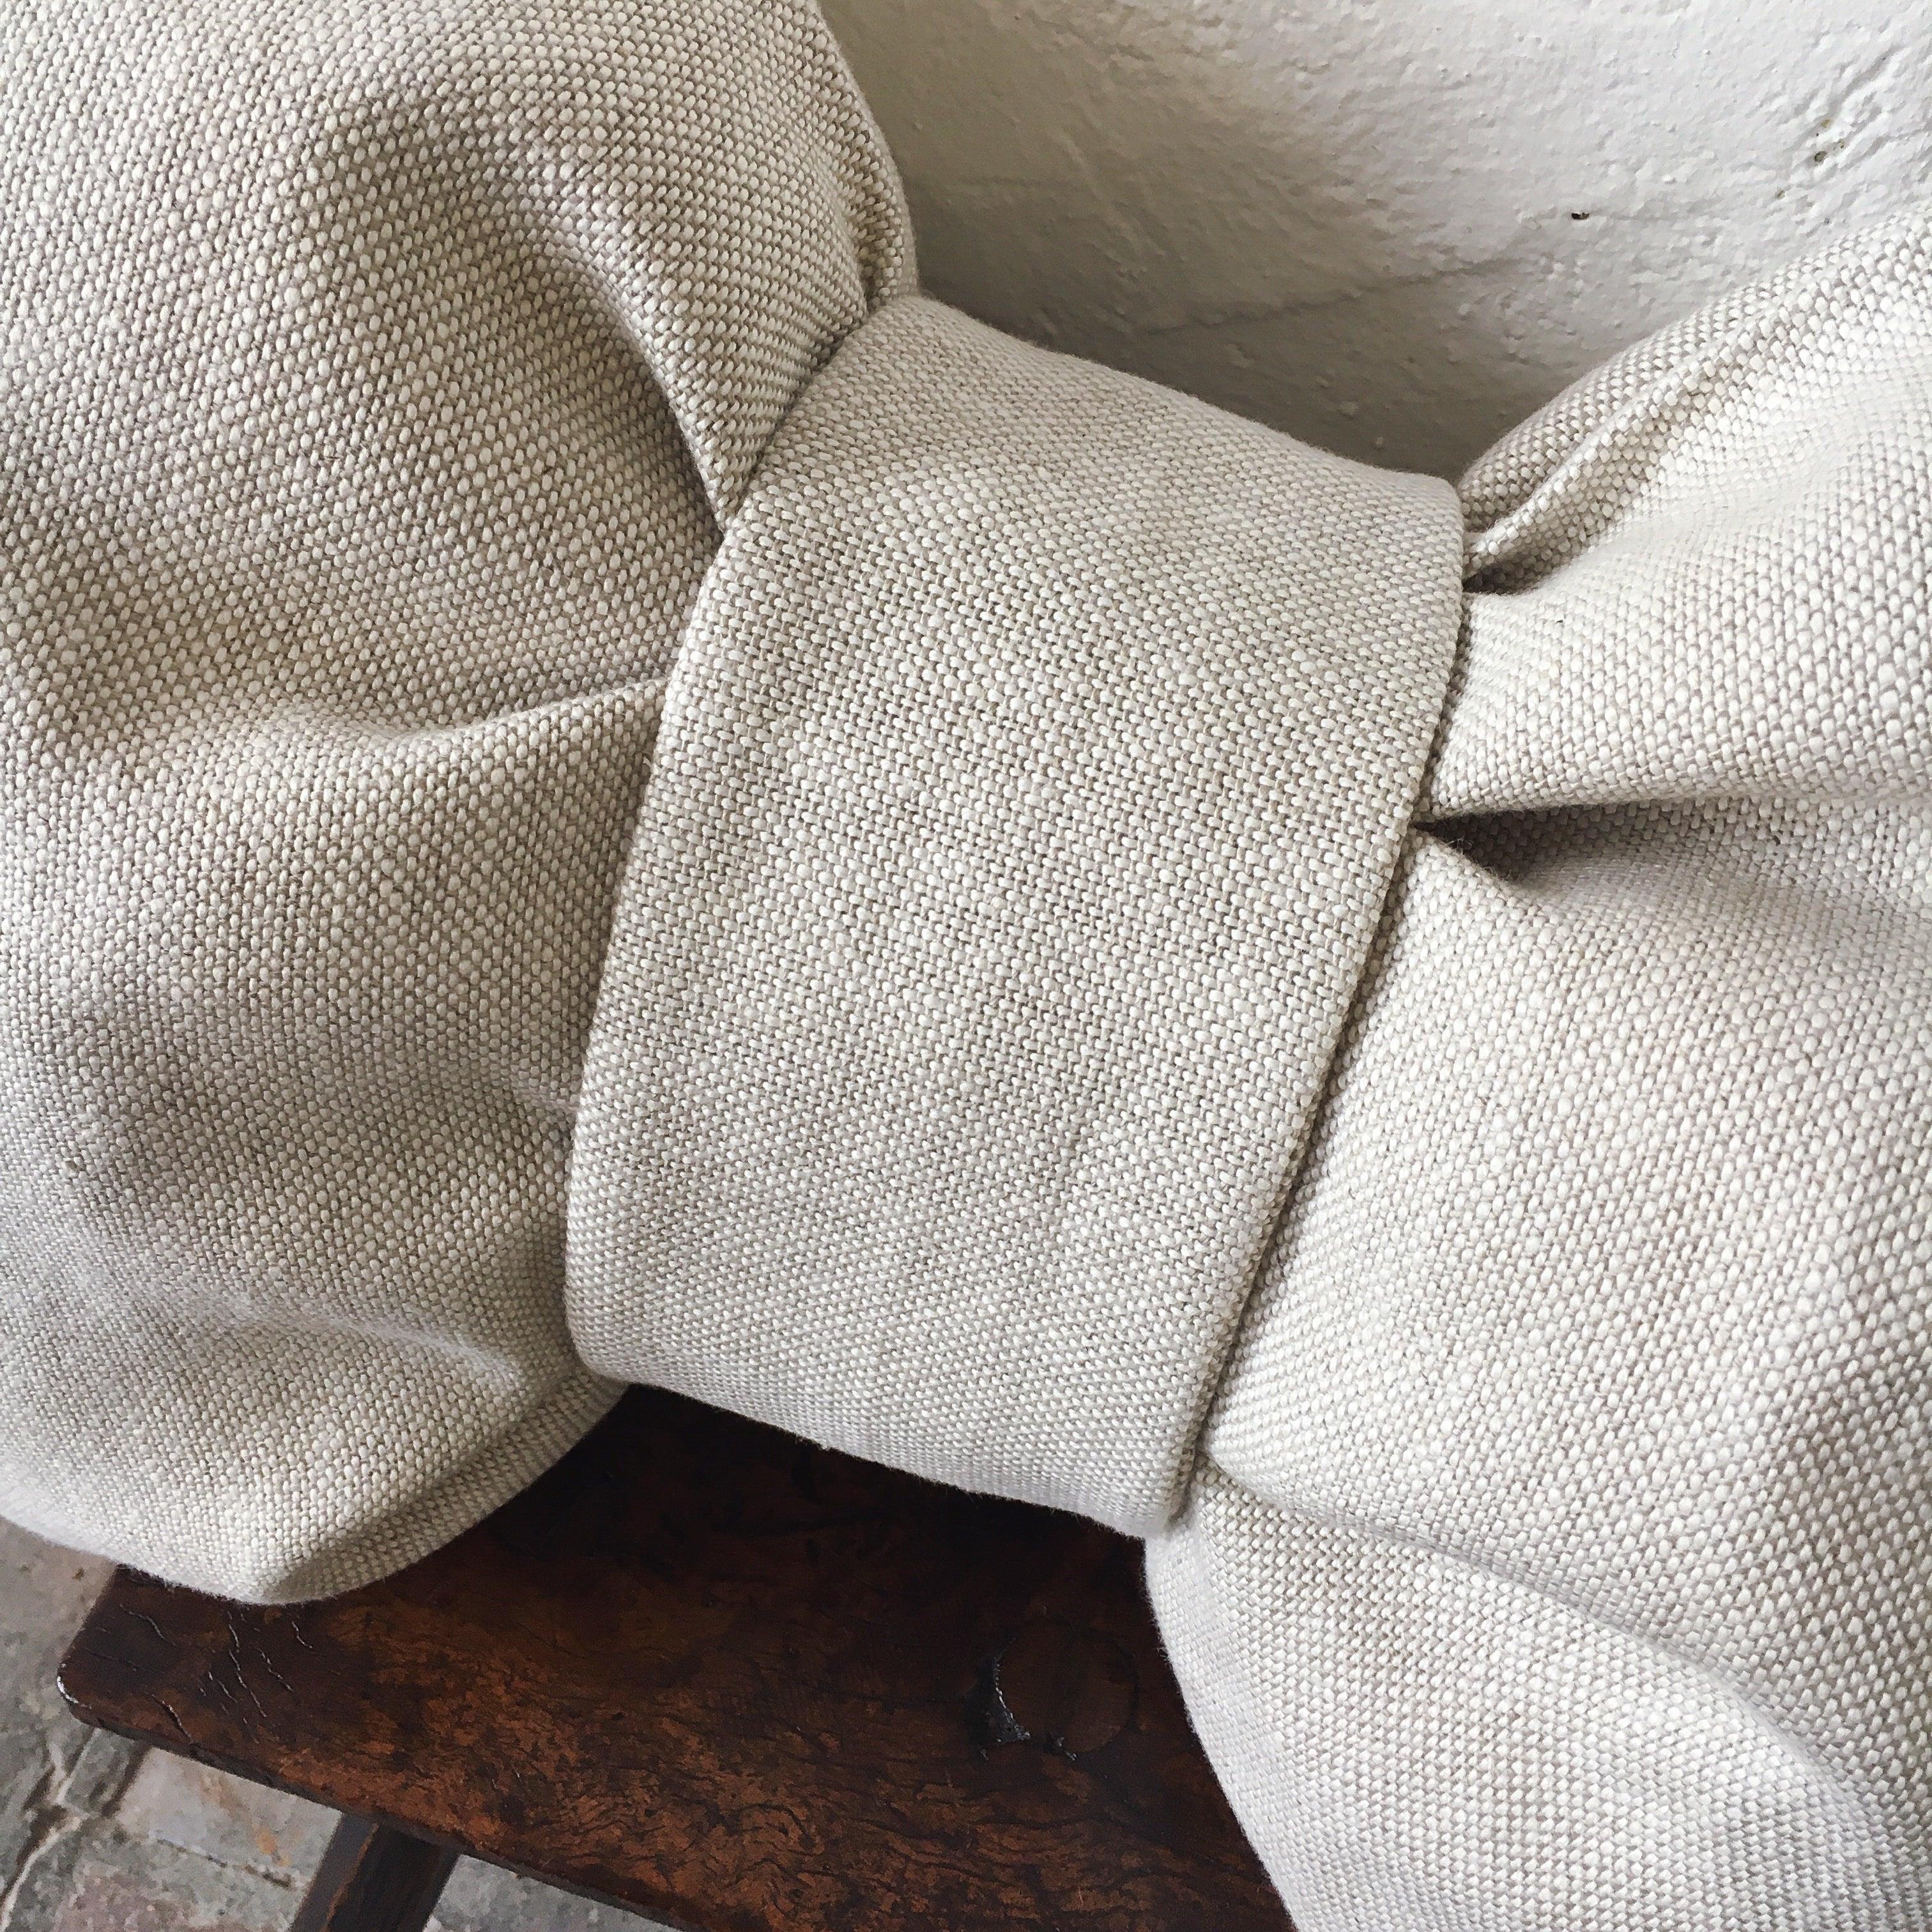 A pair of custom made contemporary luxury cushions (pillows) constructed from 100% pure Irish linen made from the flax plant, the Aristocrat of textiles, and certified by the Irish Linen Guild. The vintage cloth is from an unused roll, is heavy